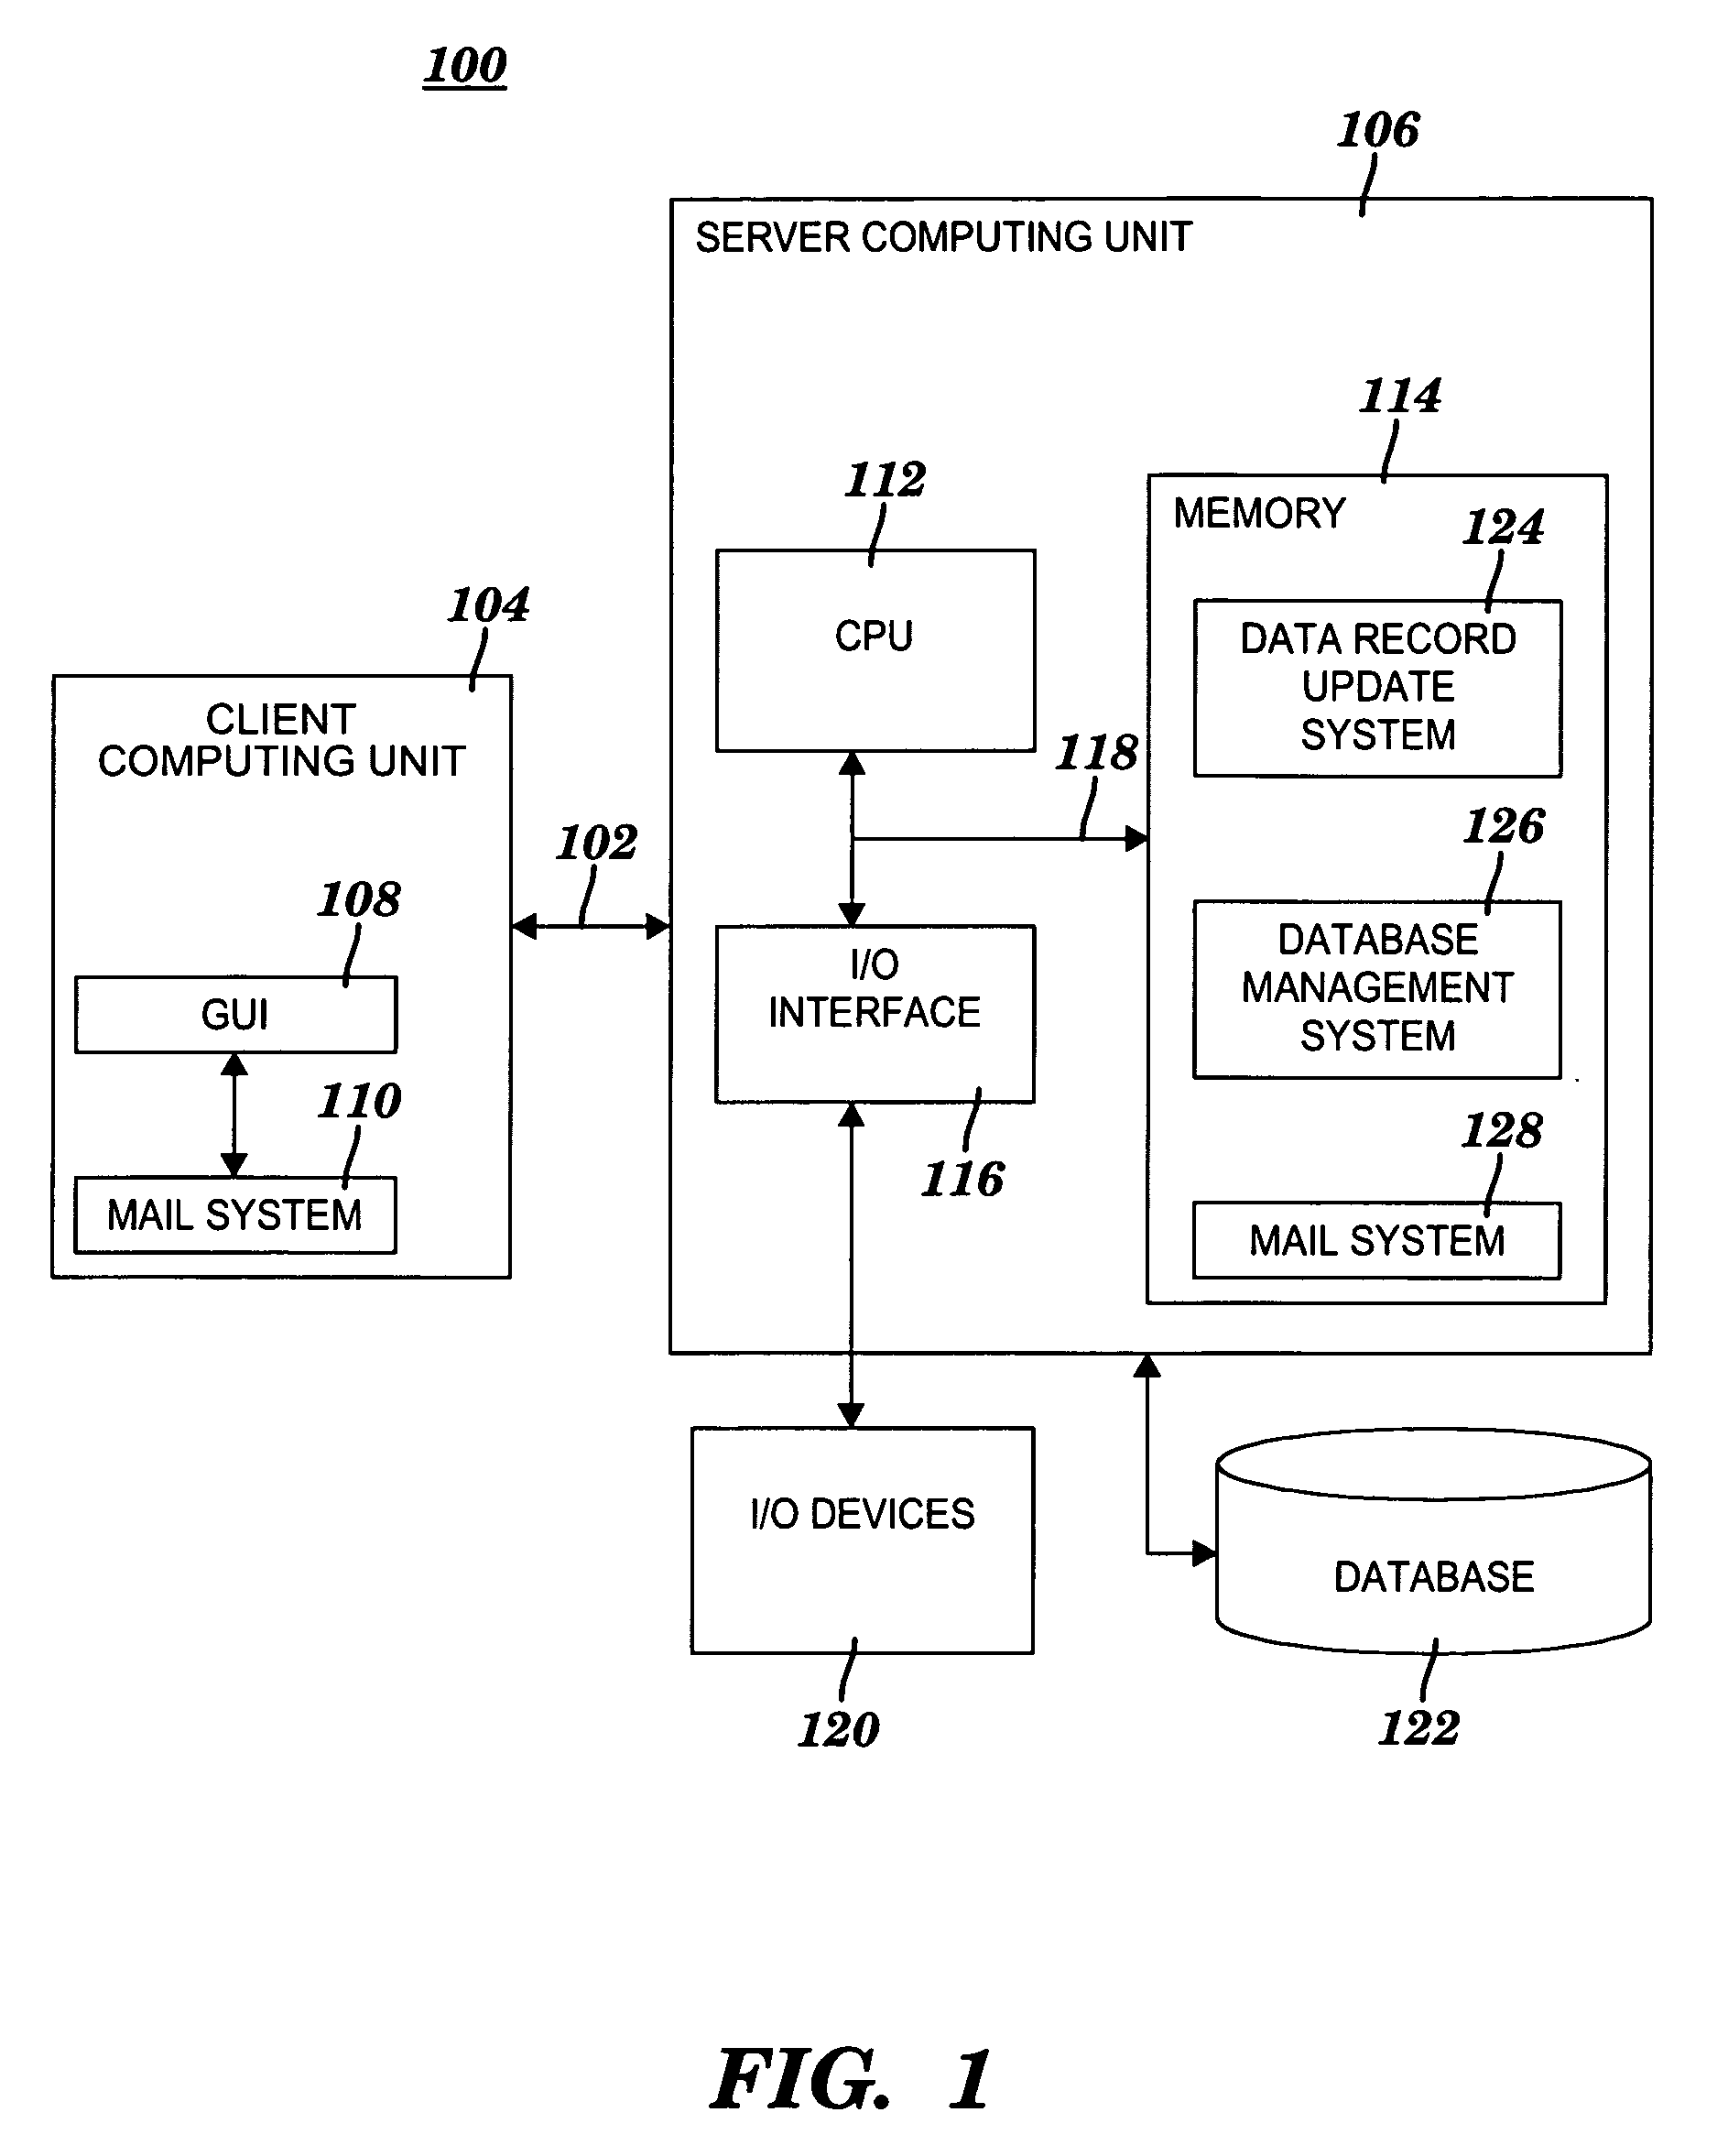 Method and system for remotely updating a status of a data record